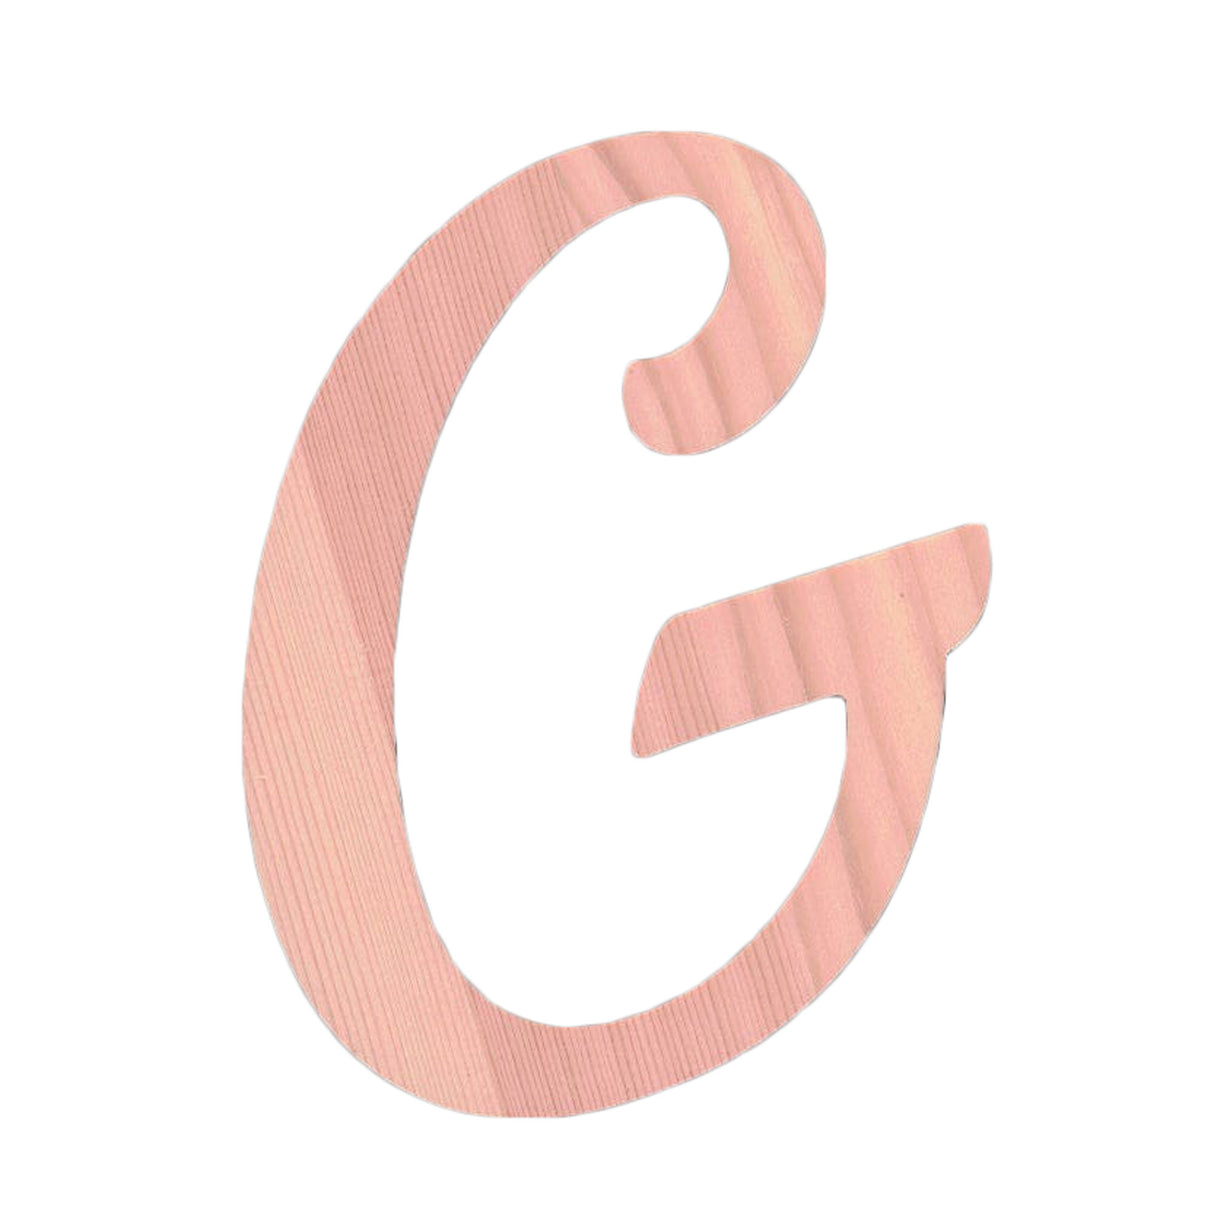 Unfinished Wooden Playball Italic Letter G (6.25 Inches) in Beige color,  shape